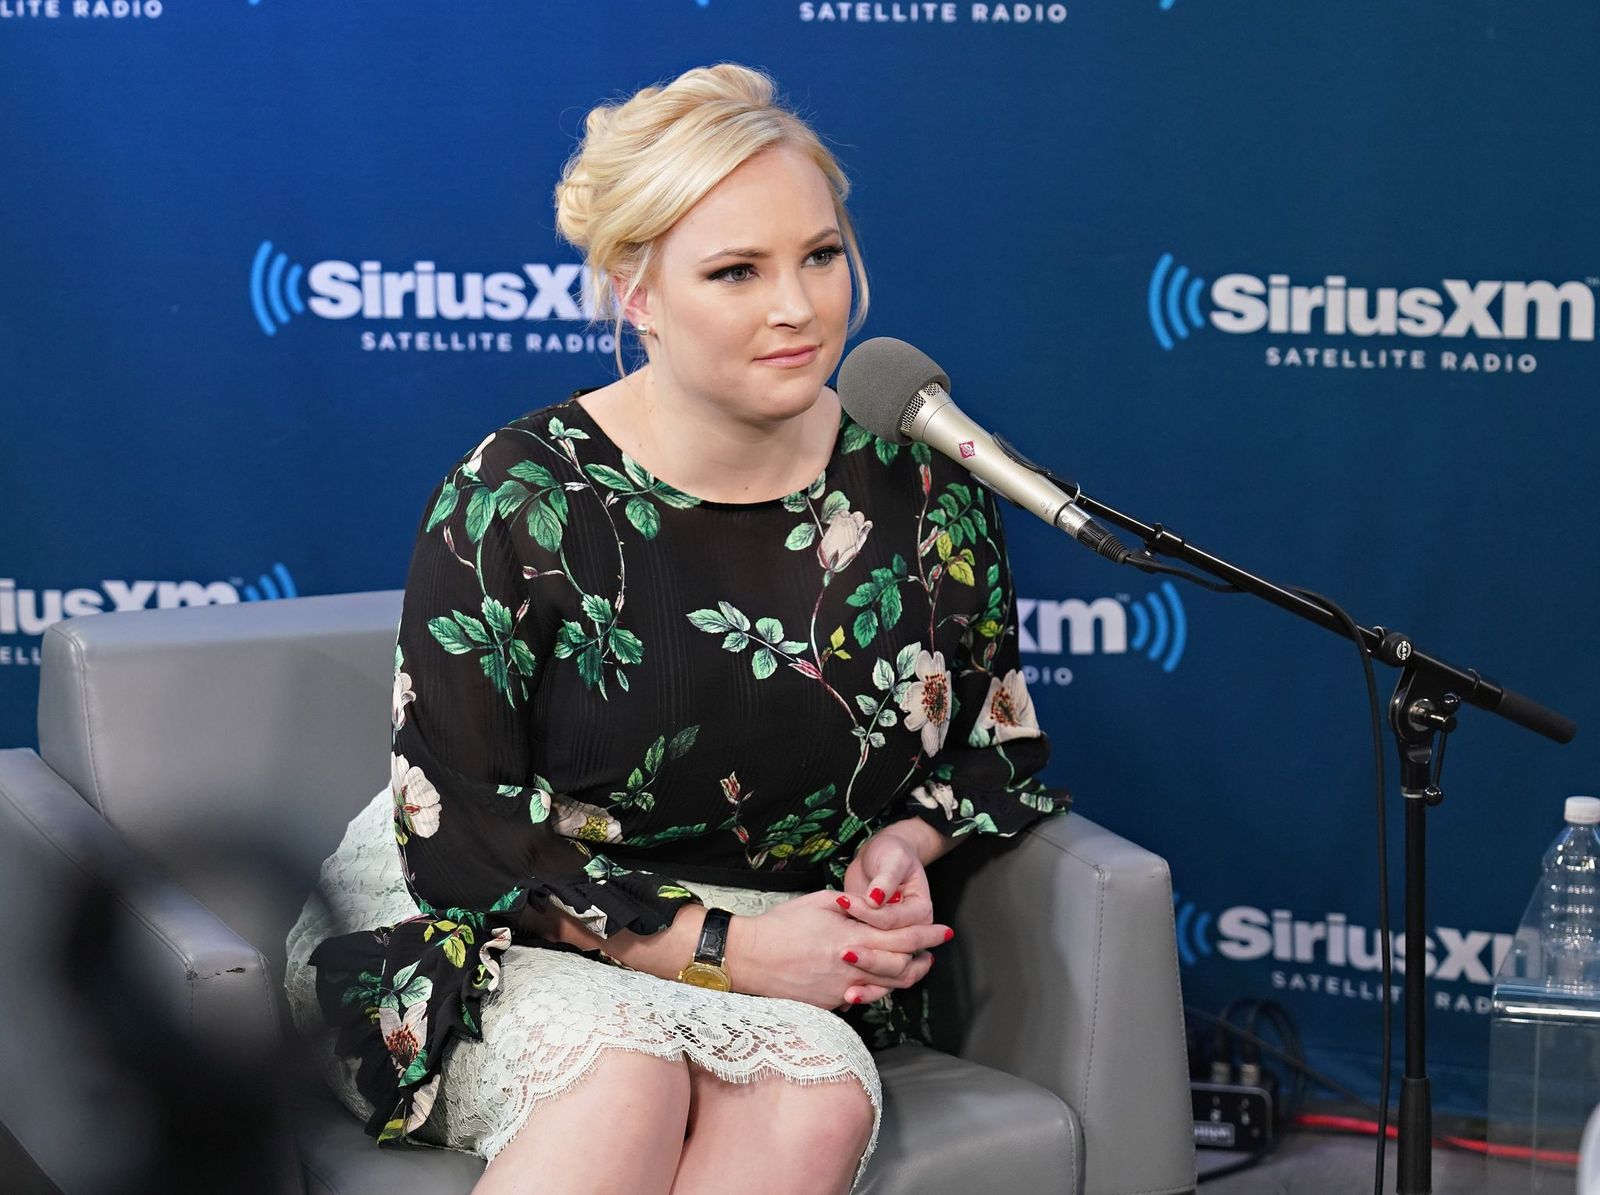 Meghan McCain joins host Julie Mason during a SiriusXM event on February 5, 2018 | Photo: Getty Images